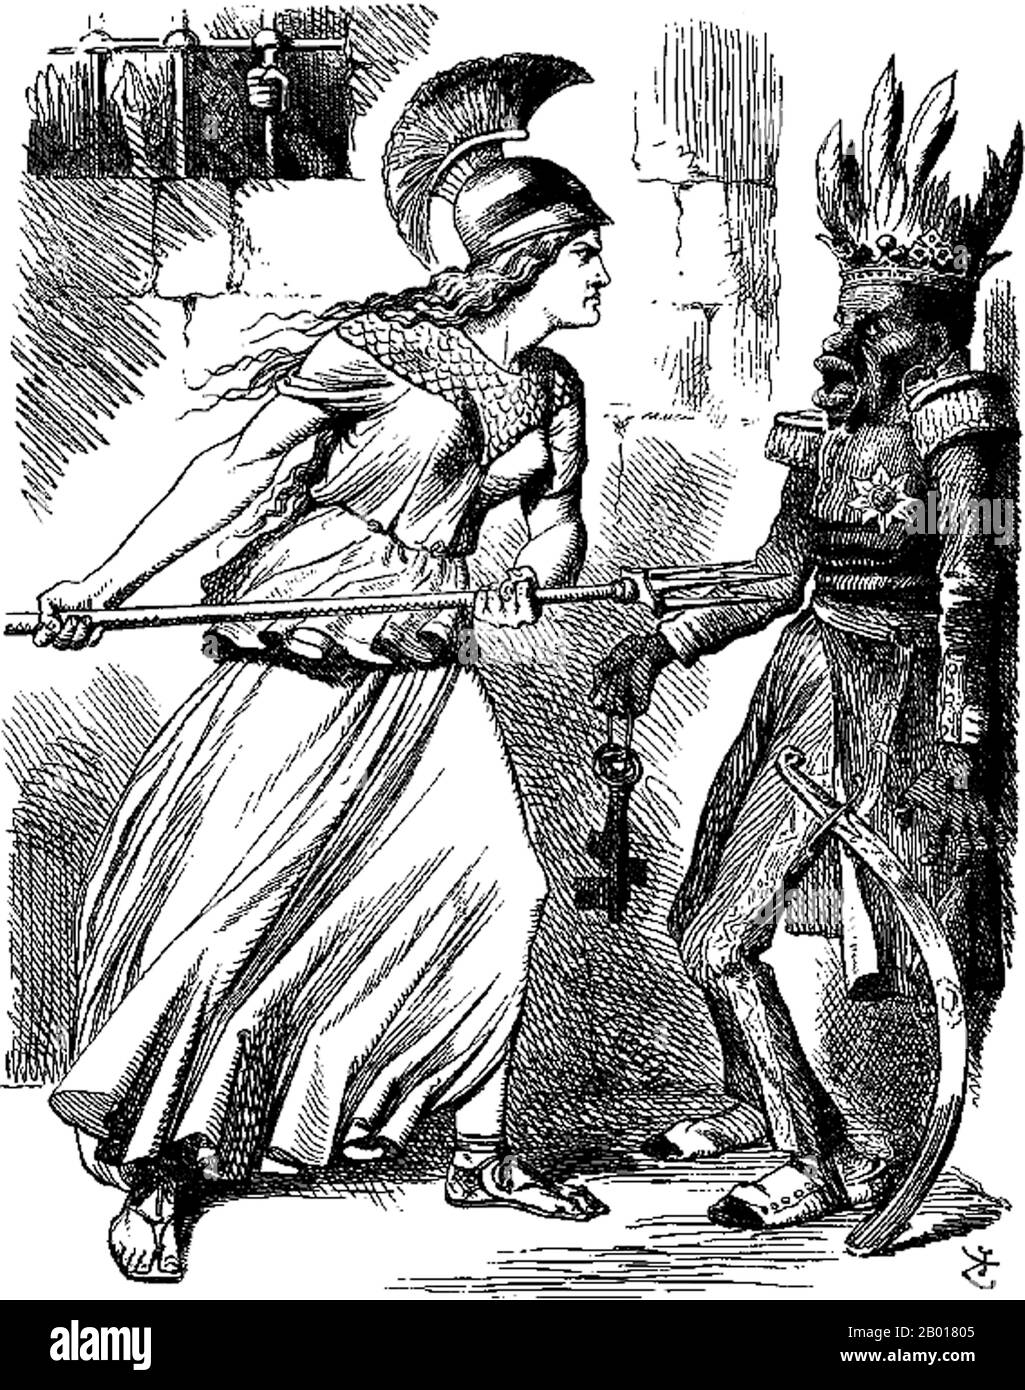 Ethiopia: Britannia asks Tewodros II 'Now then, King Theodore! How about those prisoners?' Cartoon in 'Punch' by John Tenniel (28 February 1820 - 26 February 1914), 1867.  The British 1868 Expedition to Abyssinia was a punitive expedition carried out by armed forces of the British Empire against the Ethiopian Empire. Emperor Tewodros II of Ethiopia, also known as 'Theodore', imprisoned several missionaries and two representatives of the British government. The punitive expedition sailed from Bombay in upwards of 280 steam and sailing ships, carrying over 13,000 British and Indian soldiers. Stock Photo